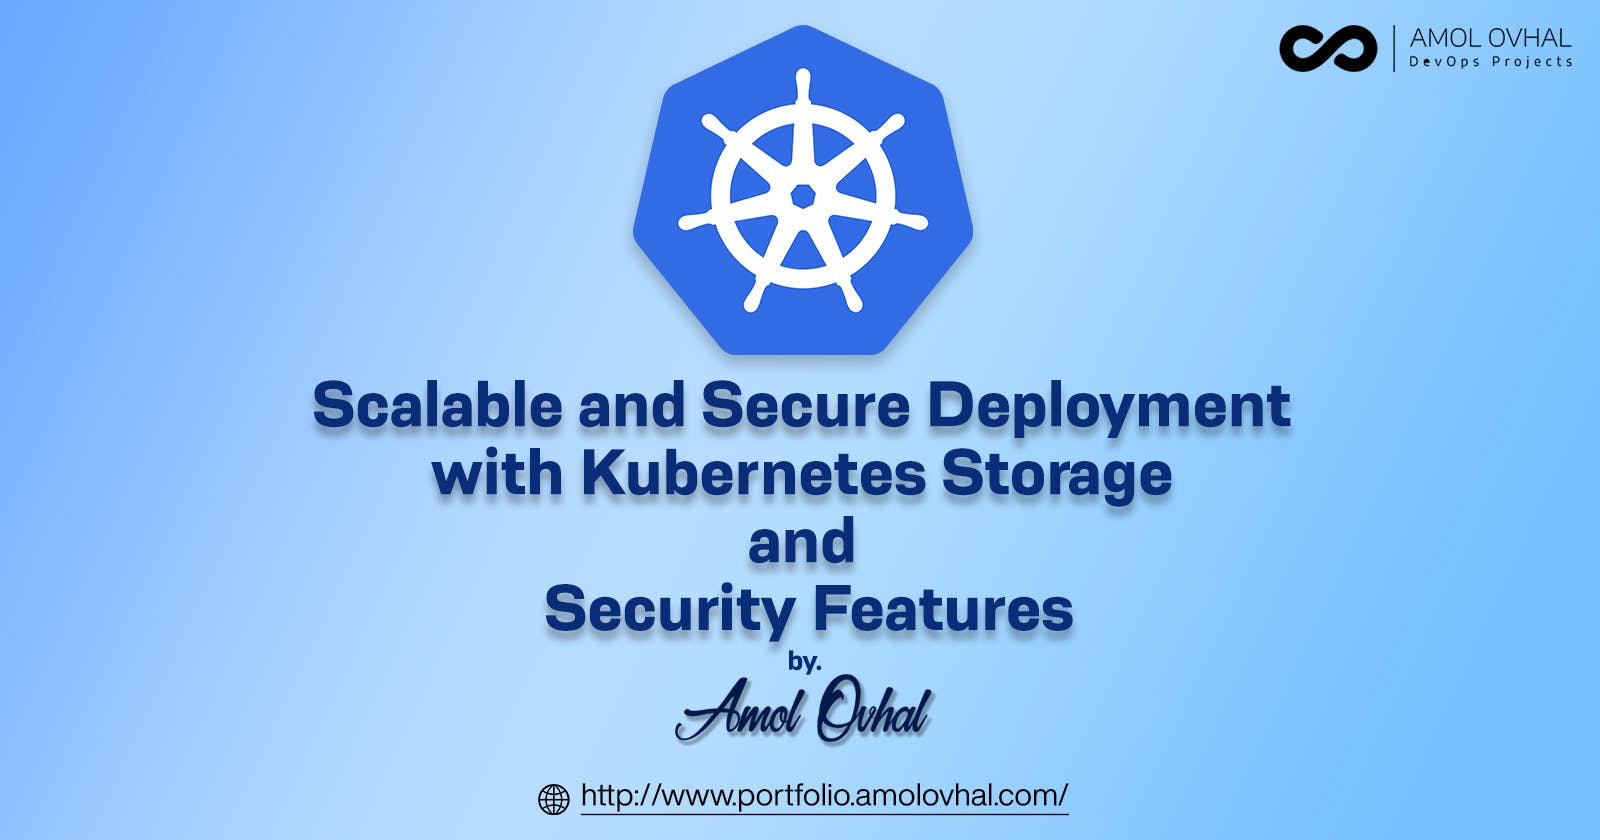 Scalable and Secure Deployment with Kubernetes Storage and Security Features